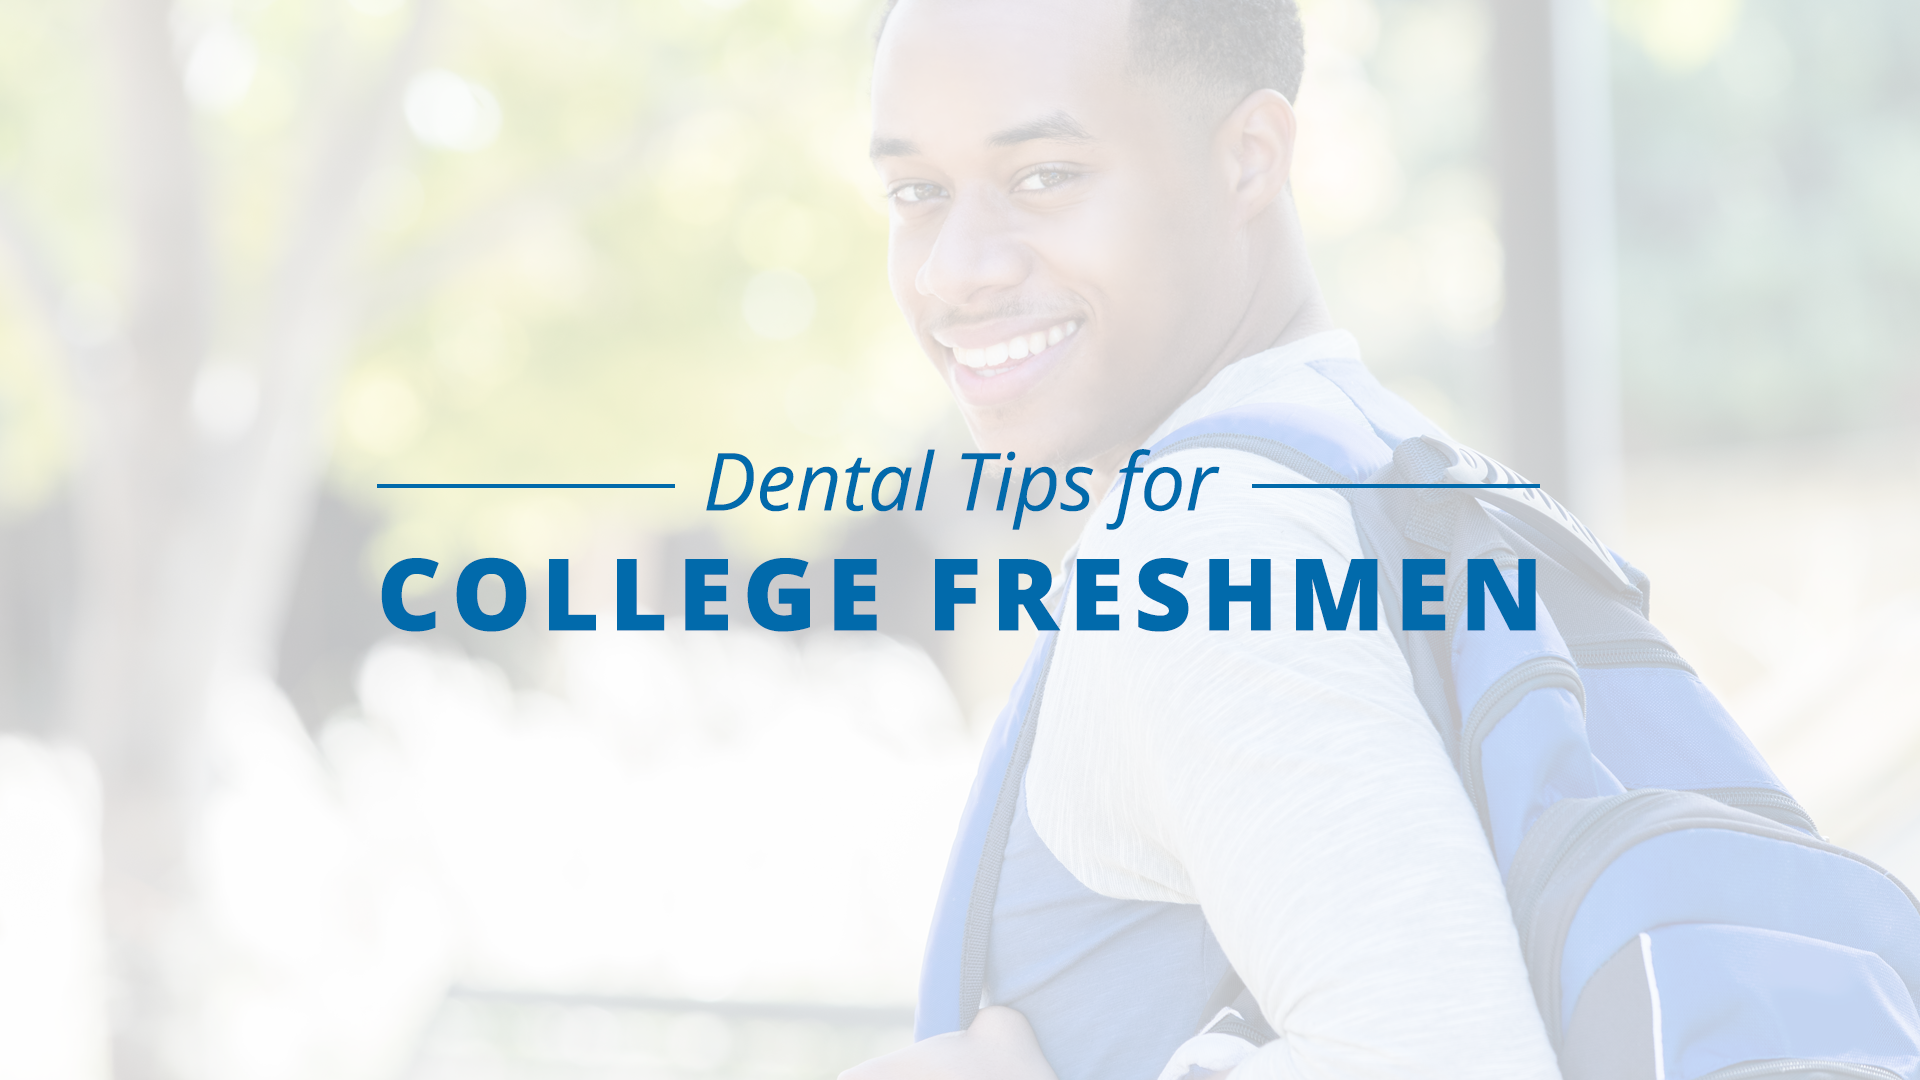 limoges dental centre - dental tips for college freshmen - back to school - first year of college